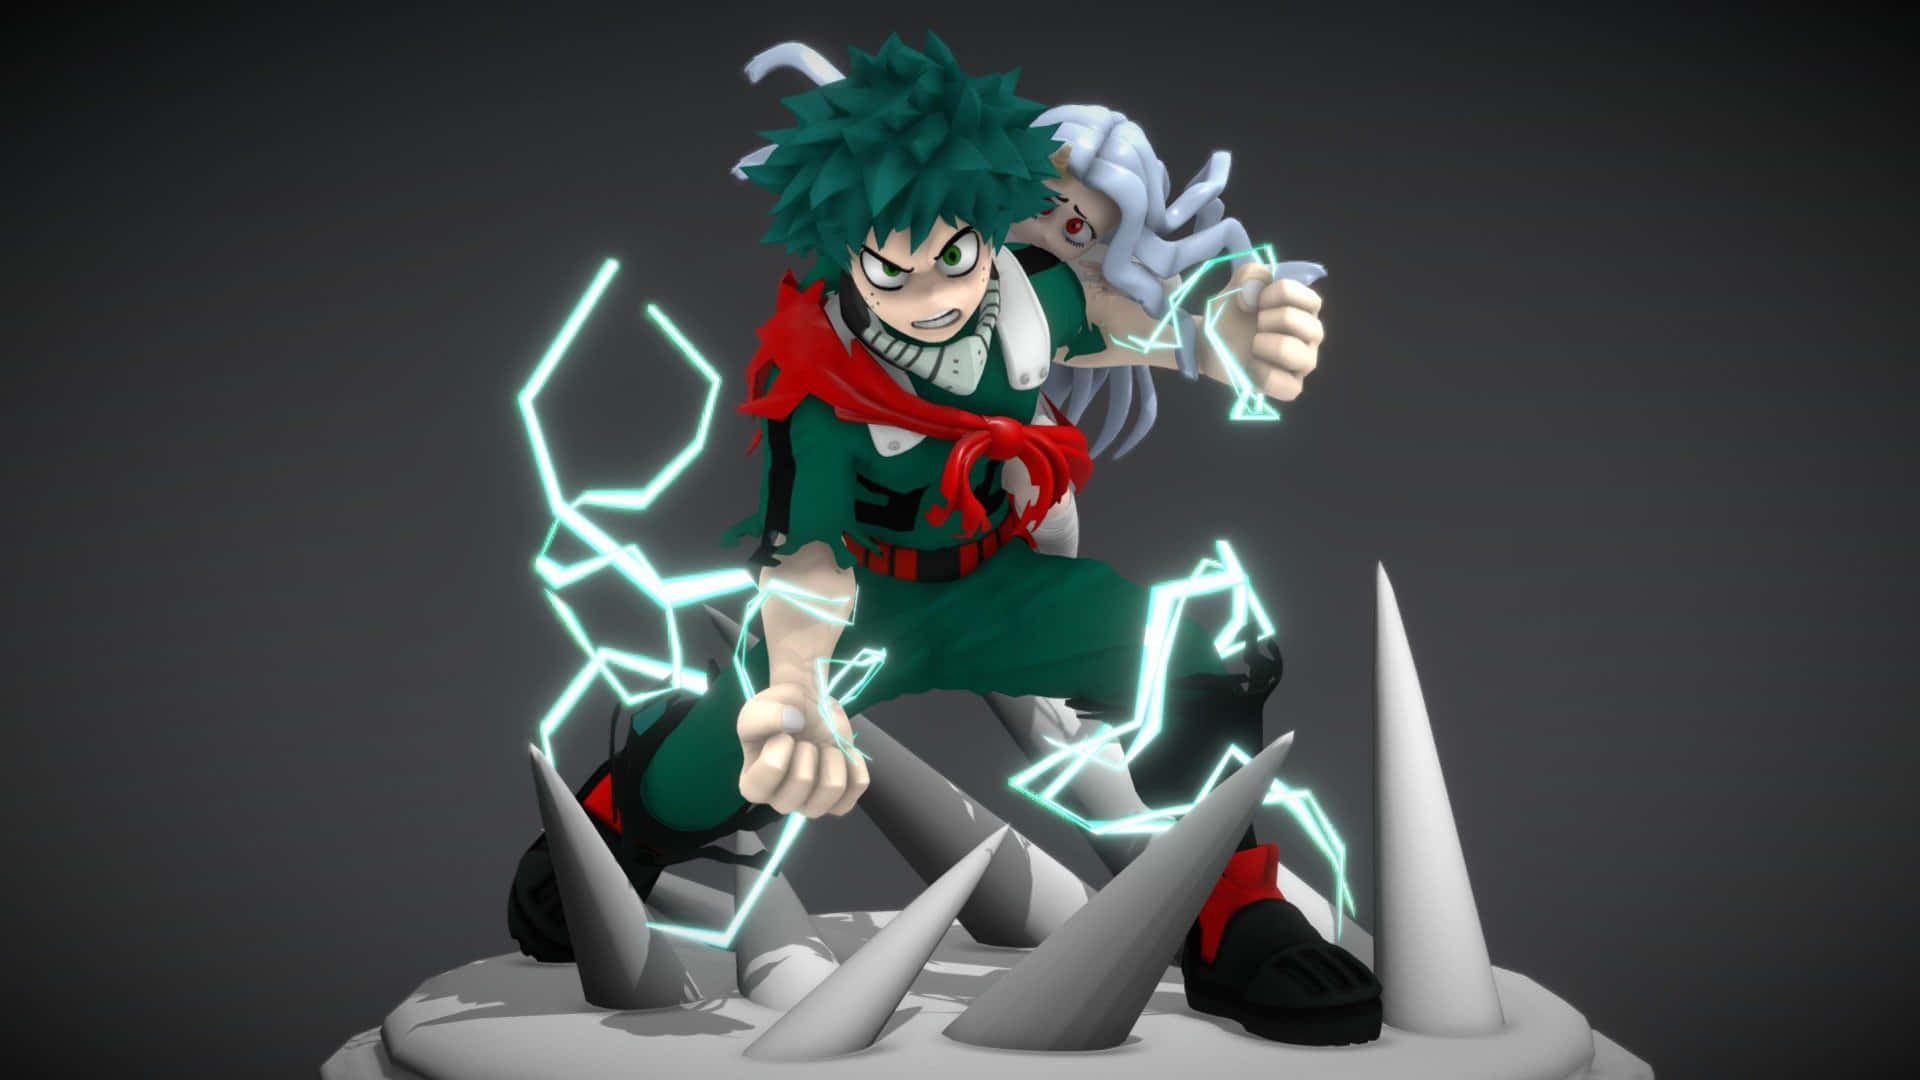 "Show your love of My Hero Academia with a laptop featuring Deku and Bakugo!" Wallpaper